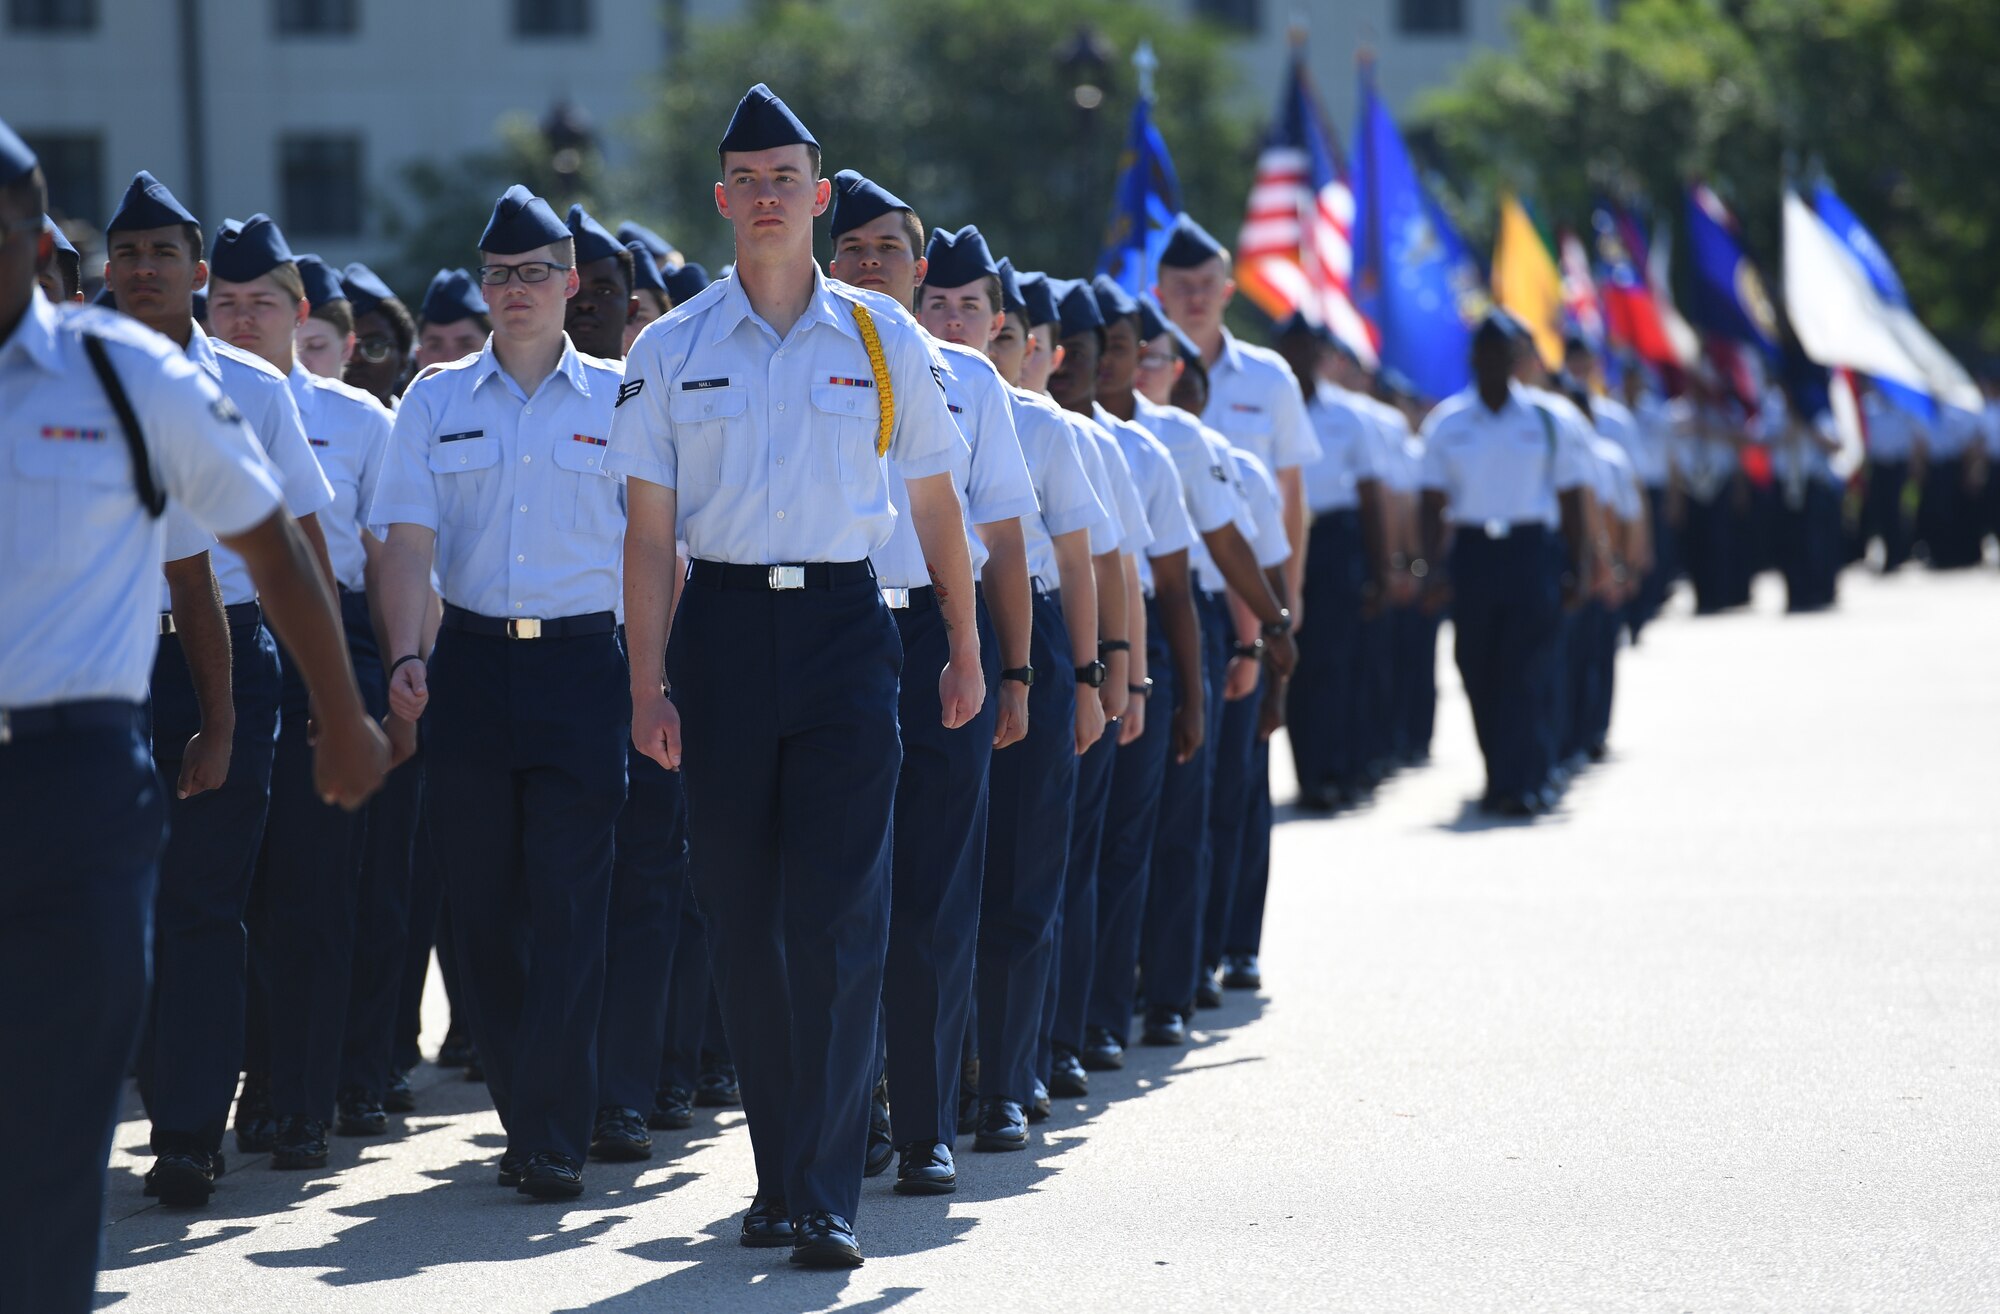 Airmen from the 81st Training Group march in formation during the 81st Training Wing change of command ceremony on the Levitow Training Support Facility drill pad at Keesler Air Force Base, Mississippi, May 16, 2019. U.S. Air Force Col. Debra Lovette passed on command of the 81st TRW to Col. Heather Blackwell. (U.S. Air Force photo by Kemberly Groue)